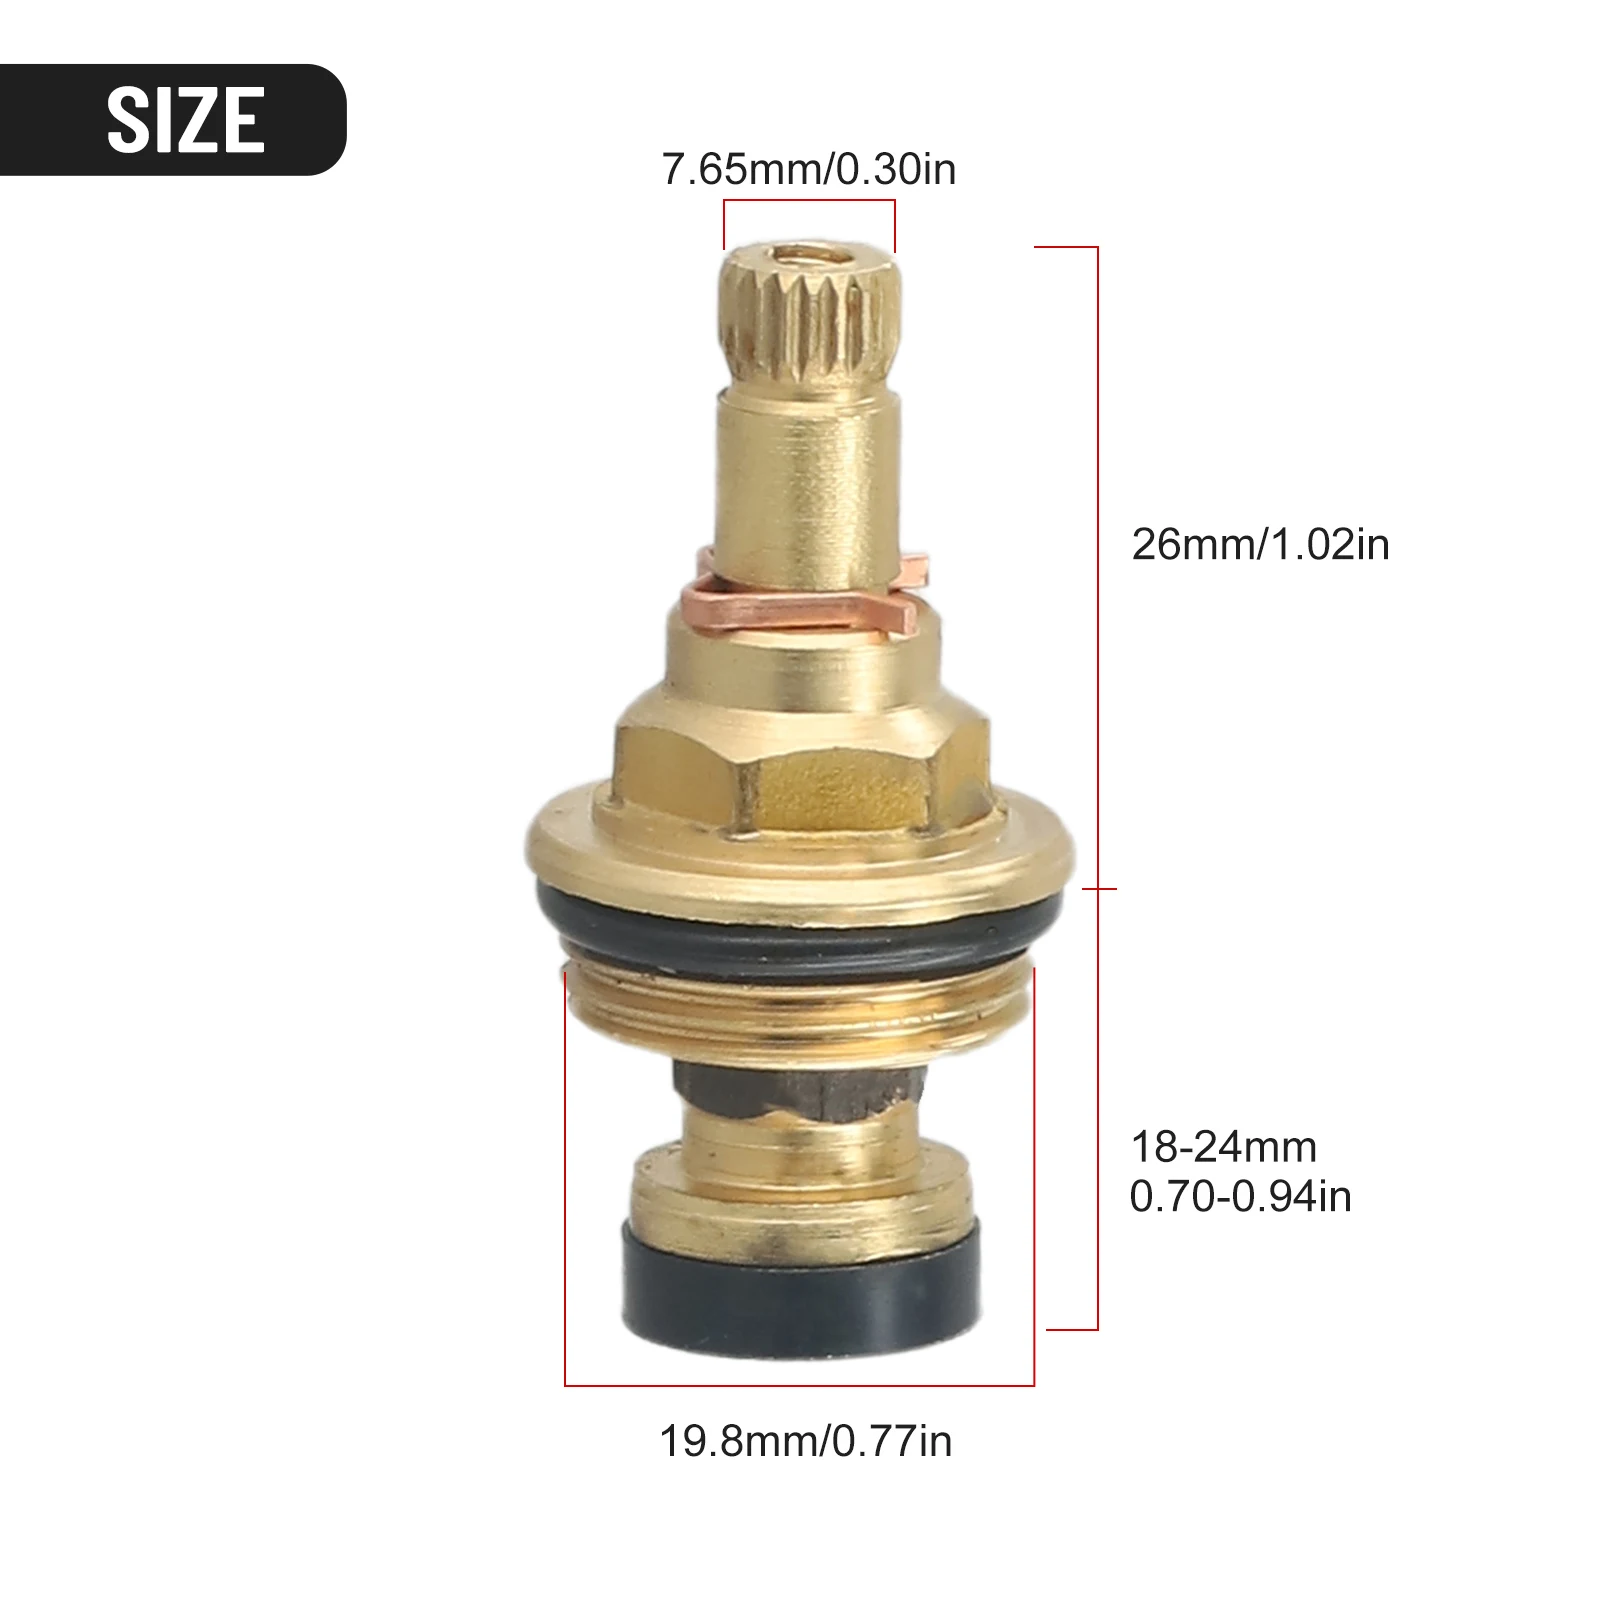 

Brass Slow Opening Spool Faucet Hot And Cold Water Spool G1/2 Bsp 20 Tooth Faucet Cartridge Copper Body Slow Opening Valve Core